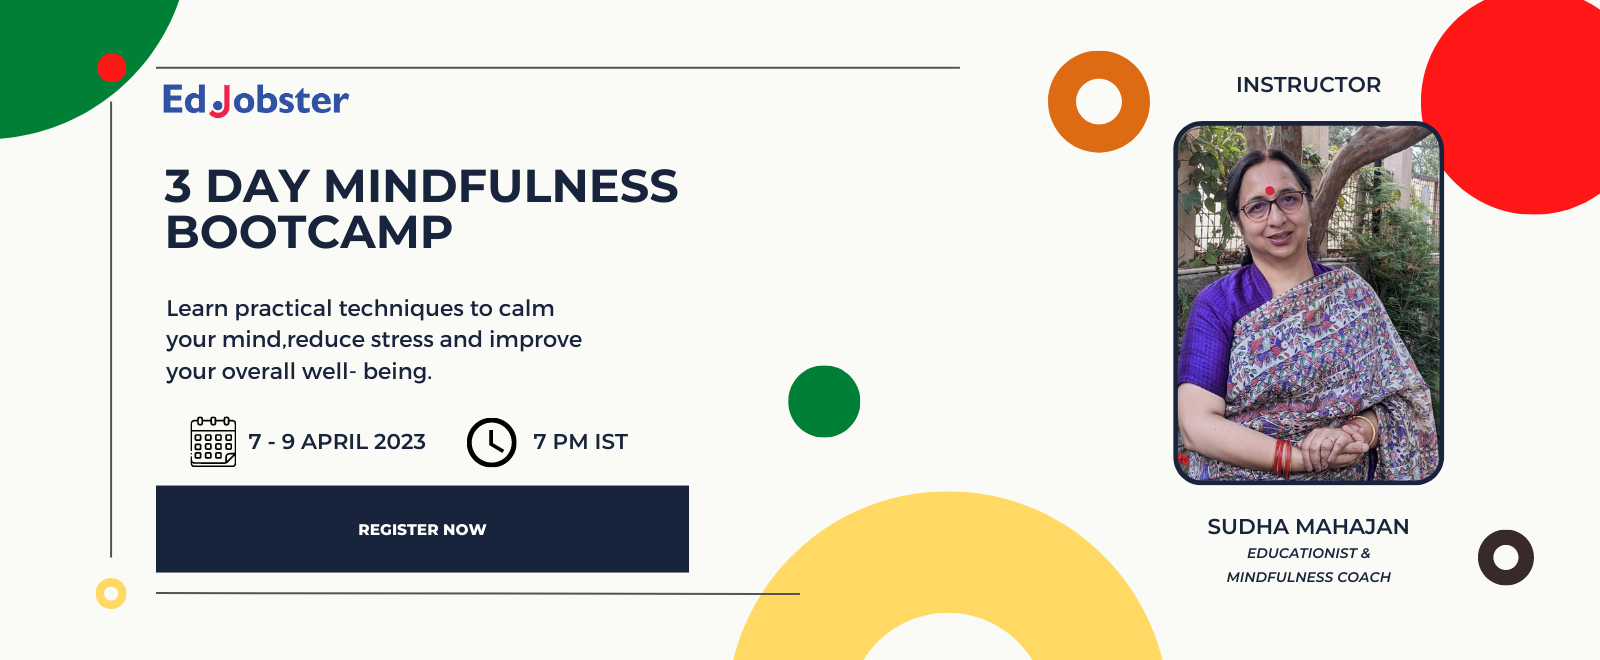 Register for the 3 day Mindfulness bootcamp